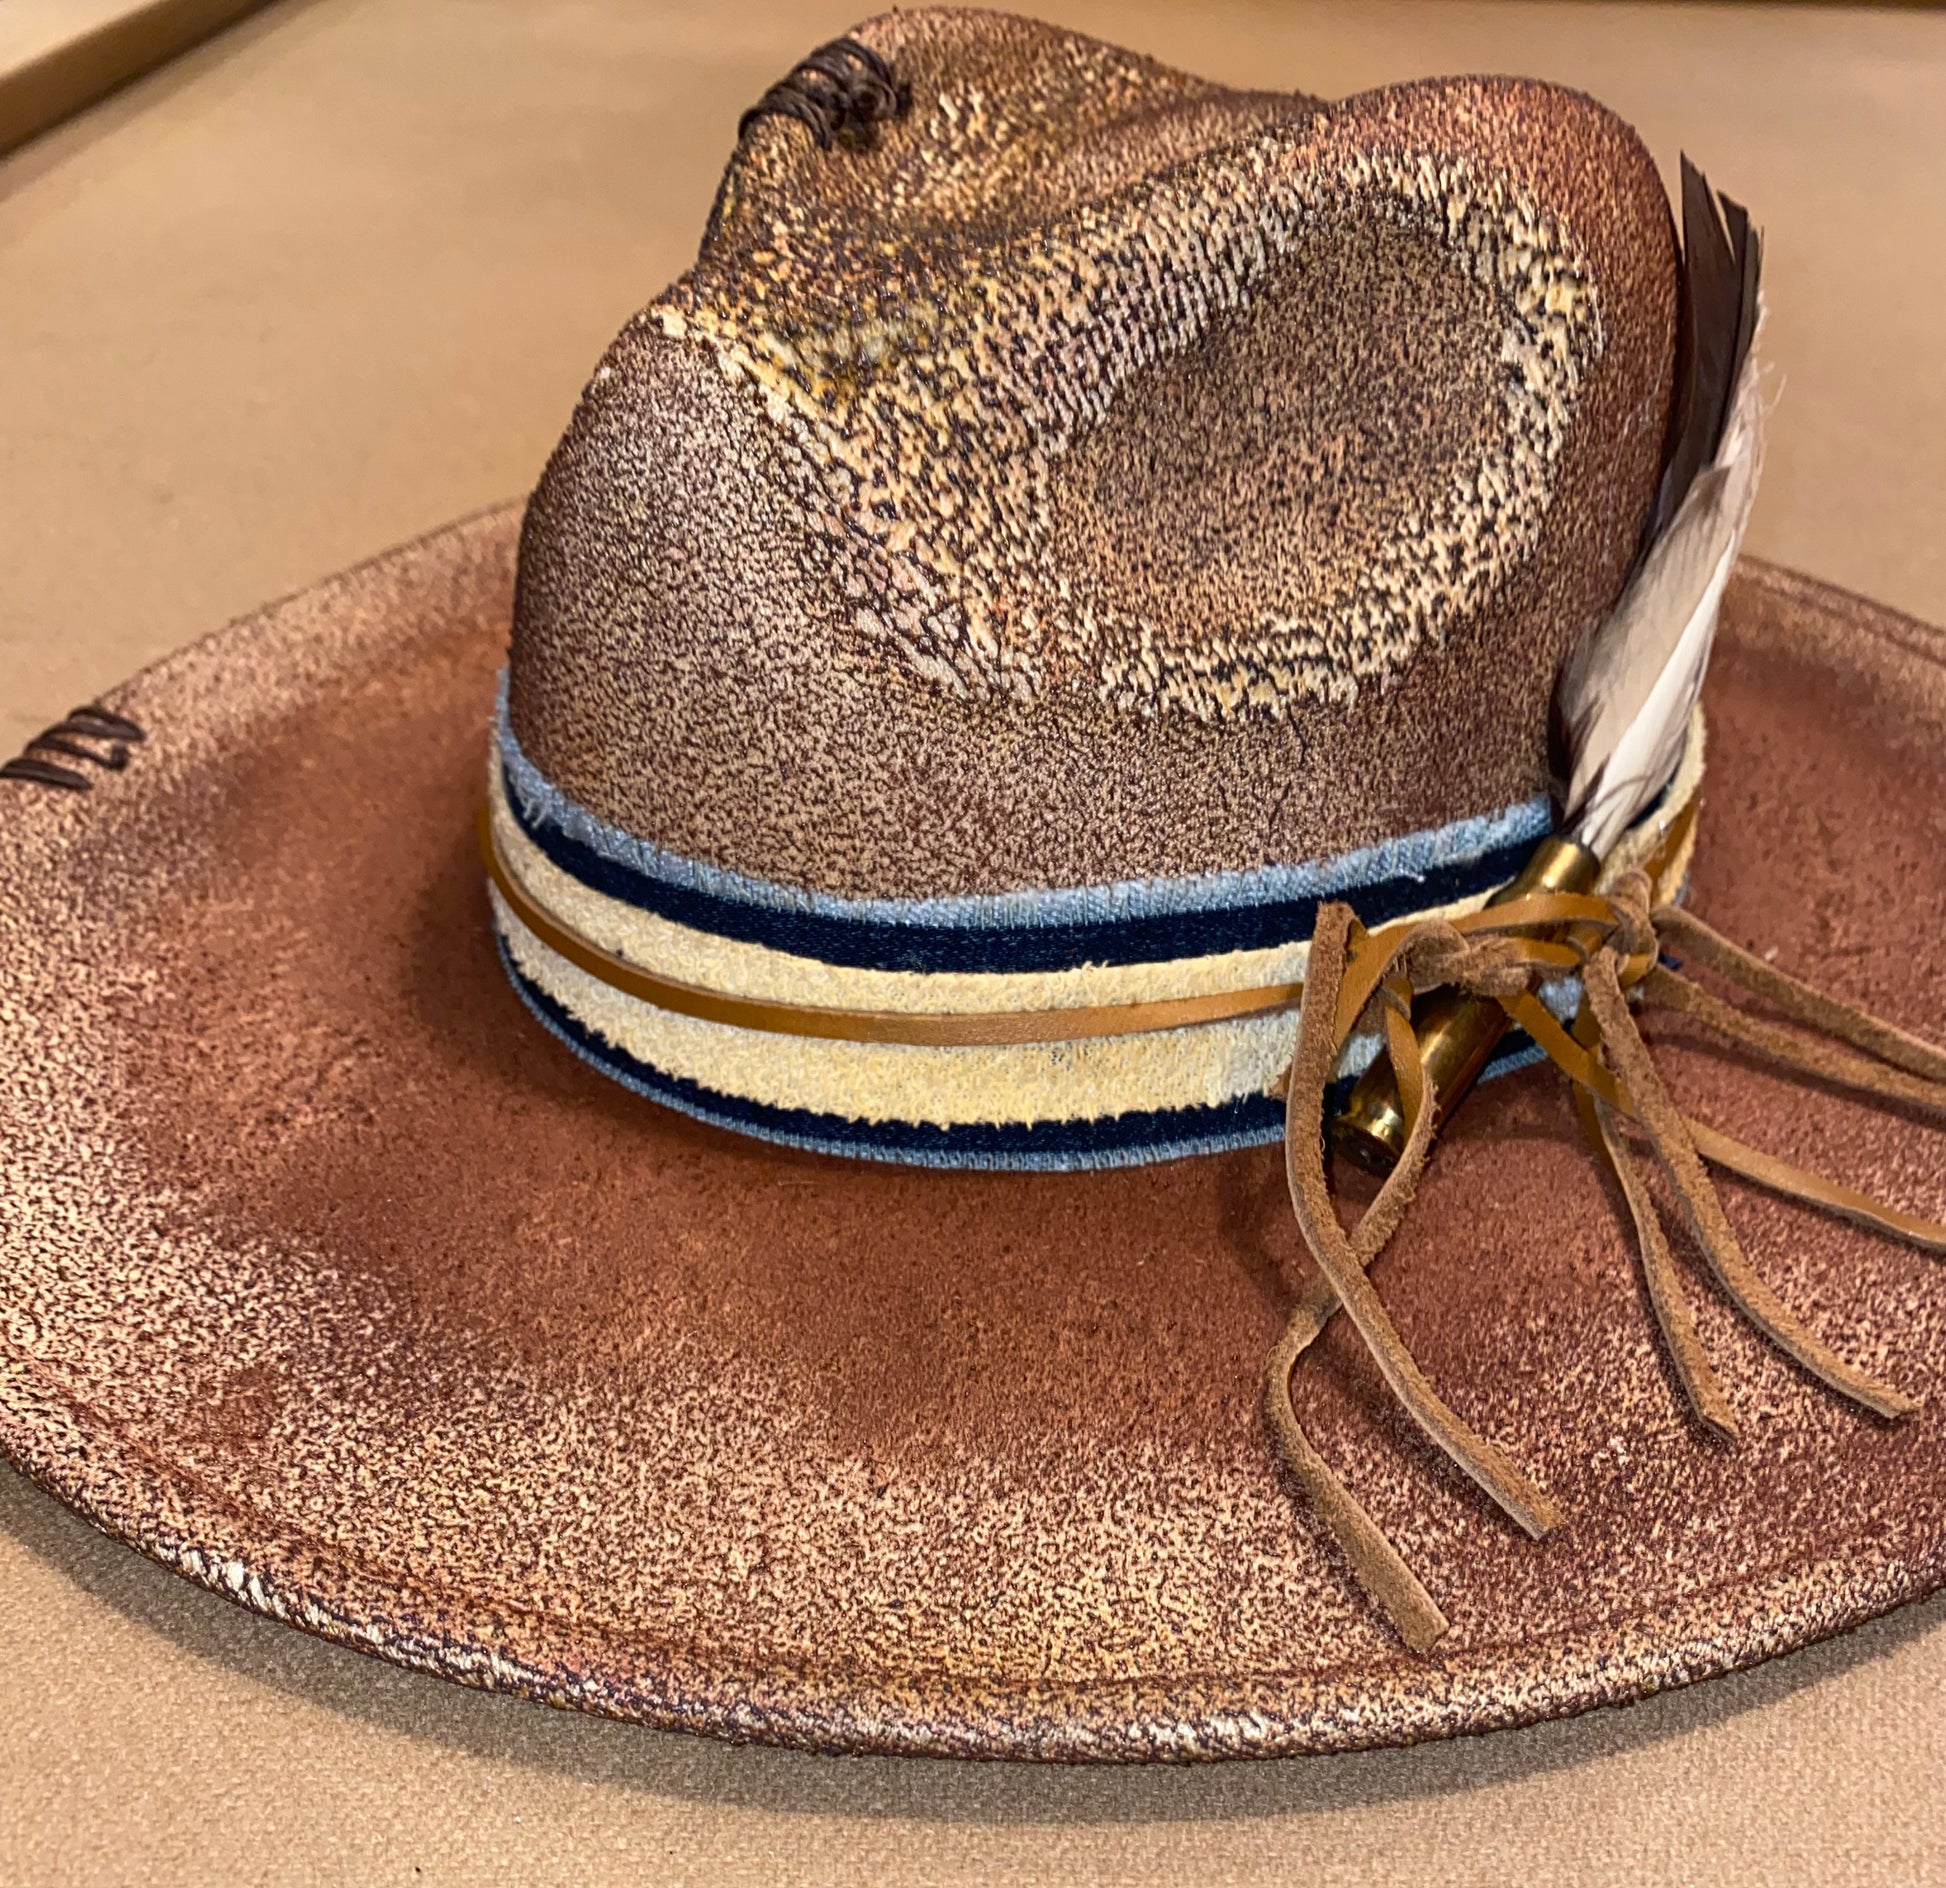 Bullet Proof Fedora - CountryFide Custom Accessories and Outdoors